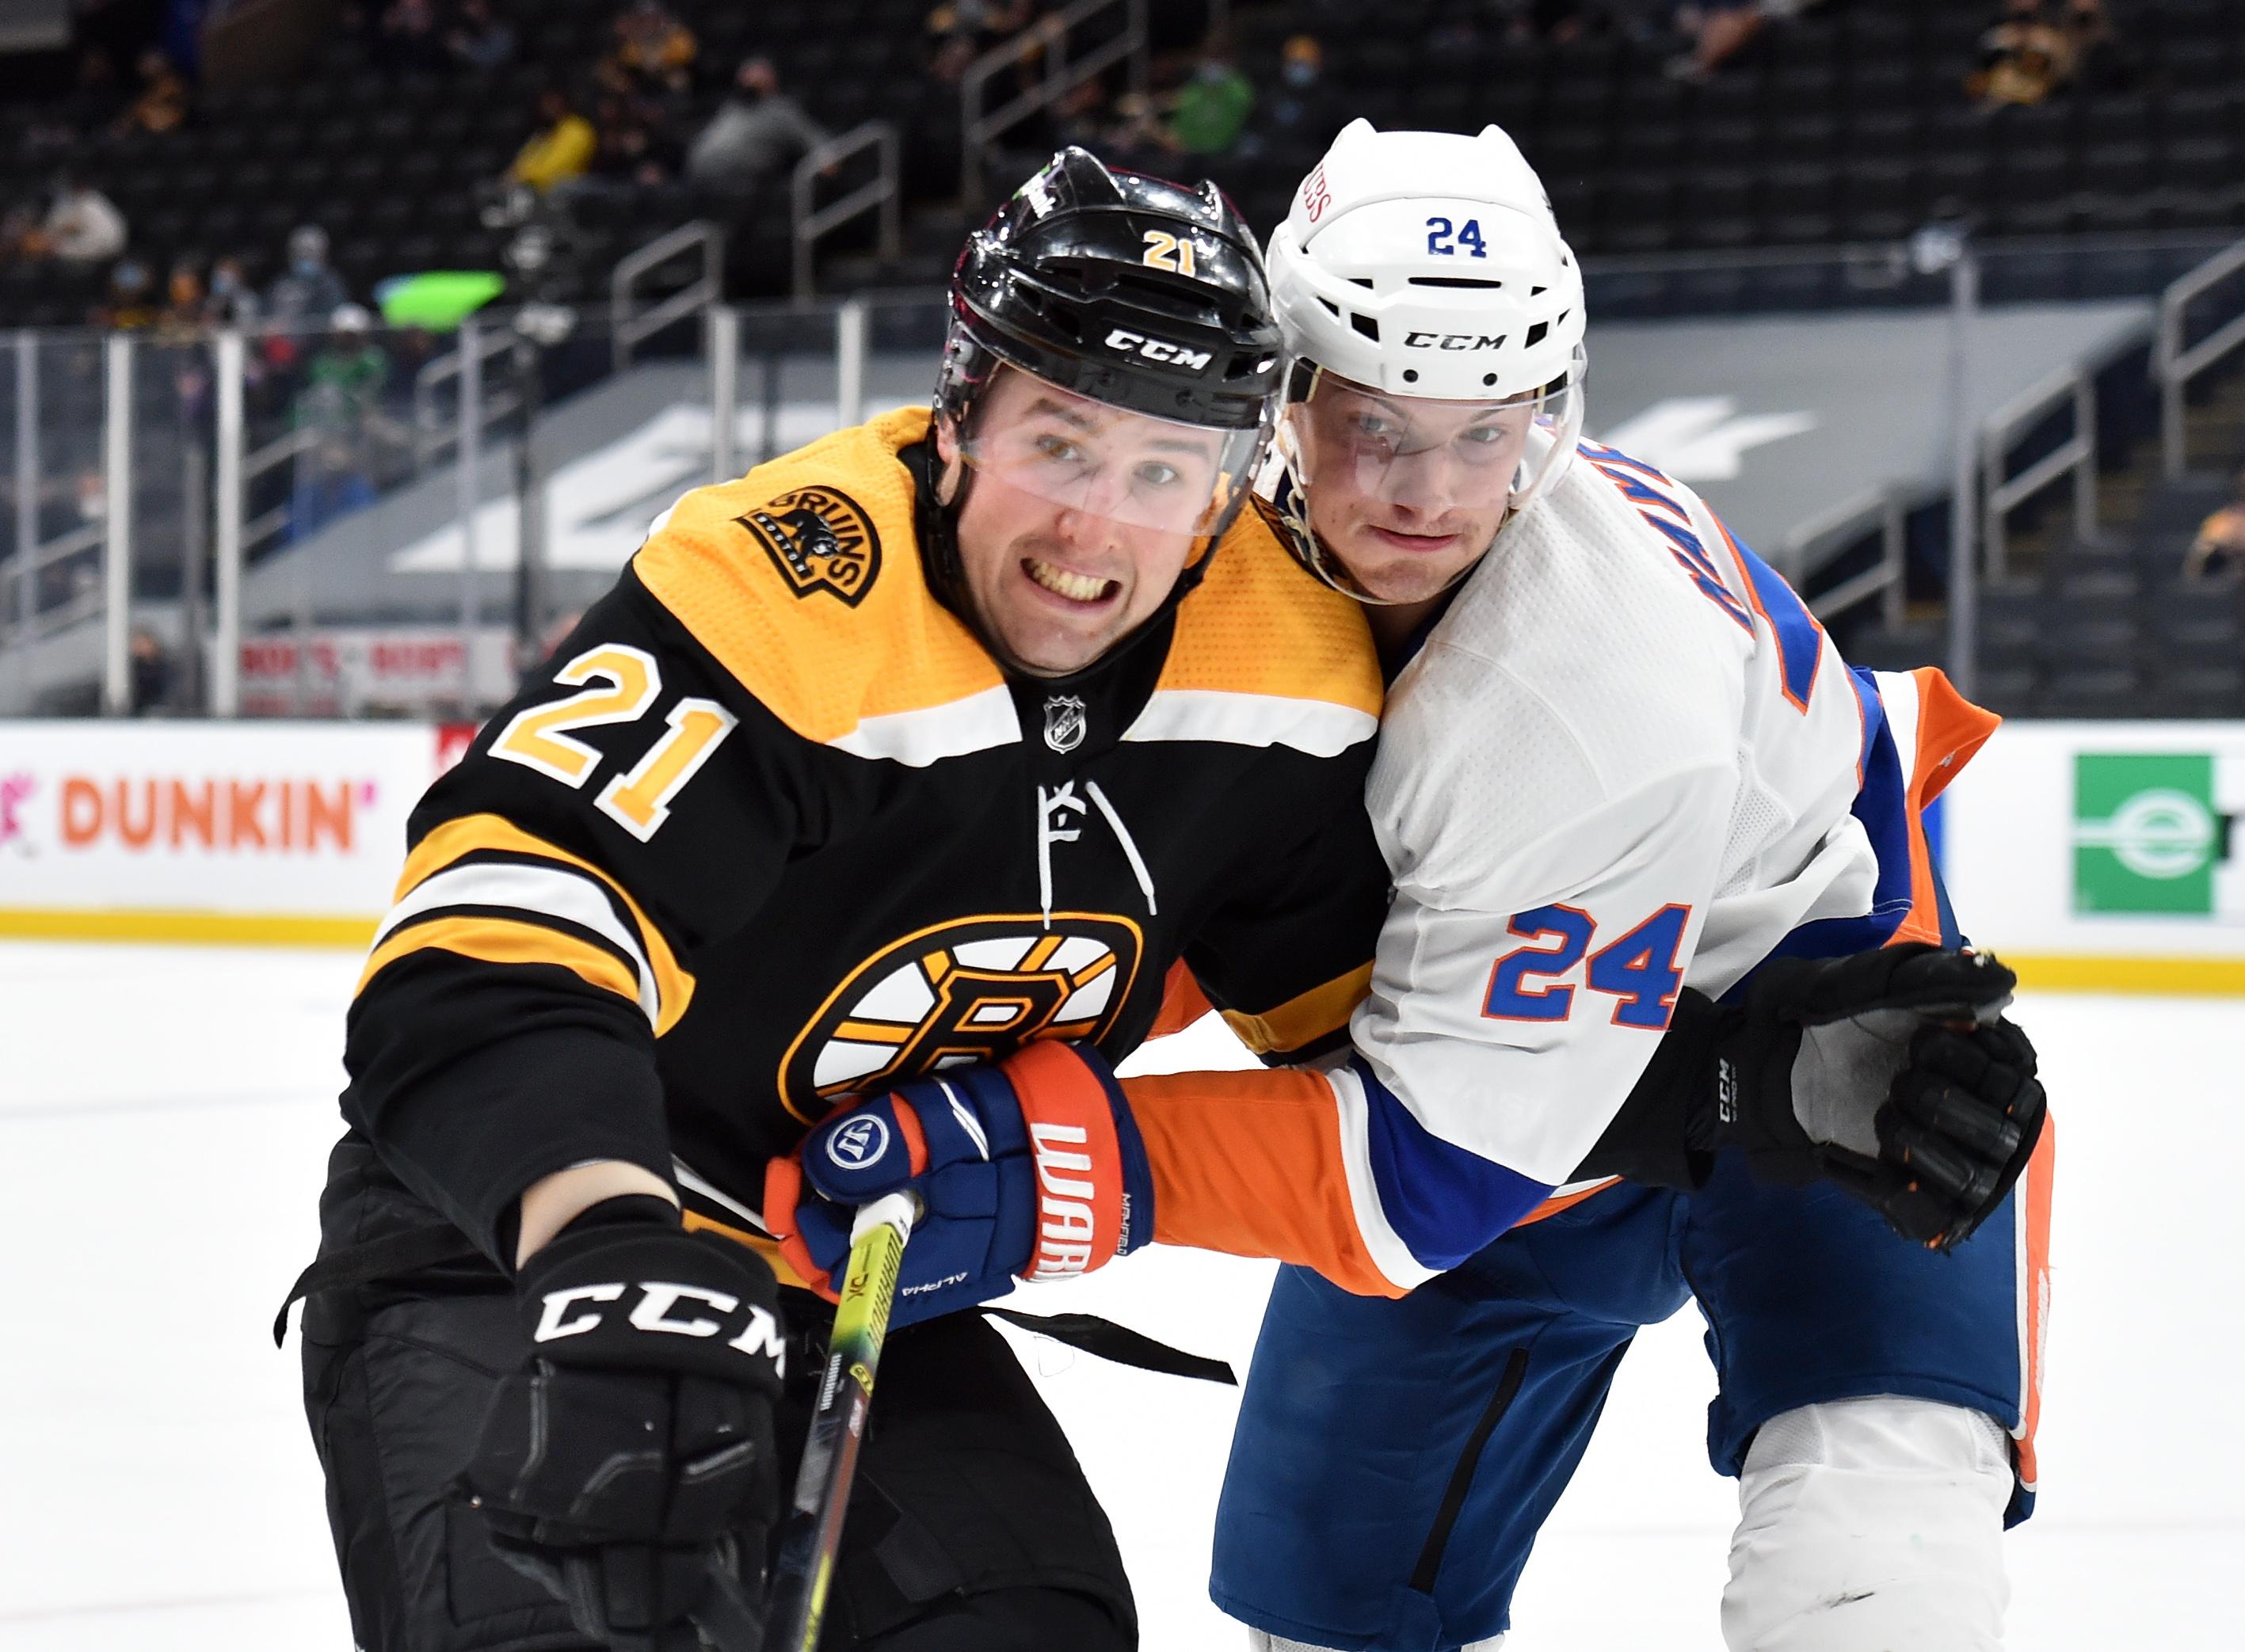 May 10, 2021; Boston, Massachusetts, USA; Boston Bruins left wing Nick Ritchie (21) and New York Islanders defenseman Nick Leddy (2) battle for position during the second period at TD Garden. Mandatory Credit: Bob DeChiara-USA TODAY Sports / Bob DeChiara-USA TODAY Sports